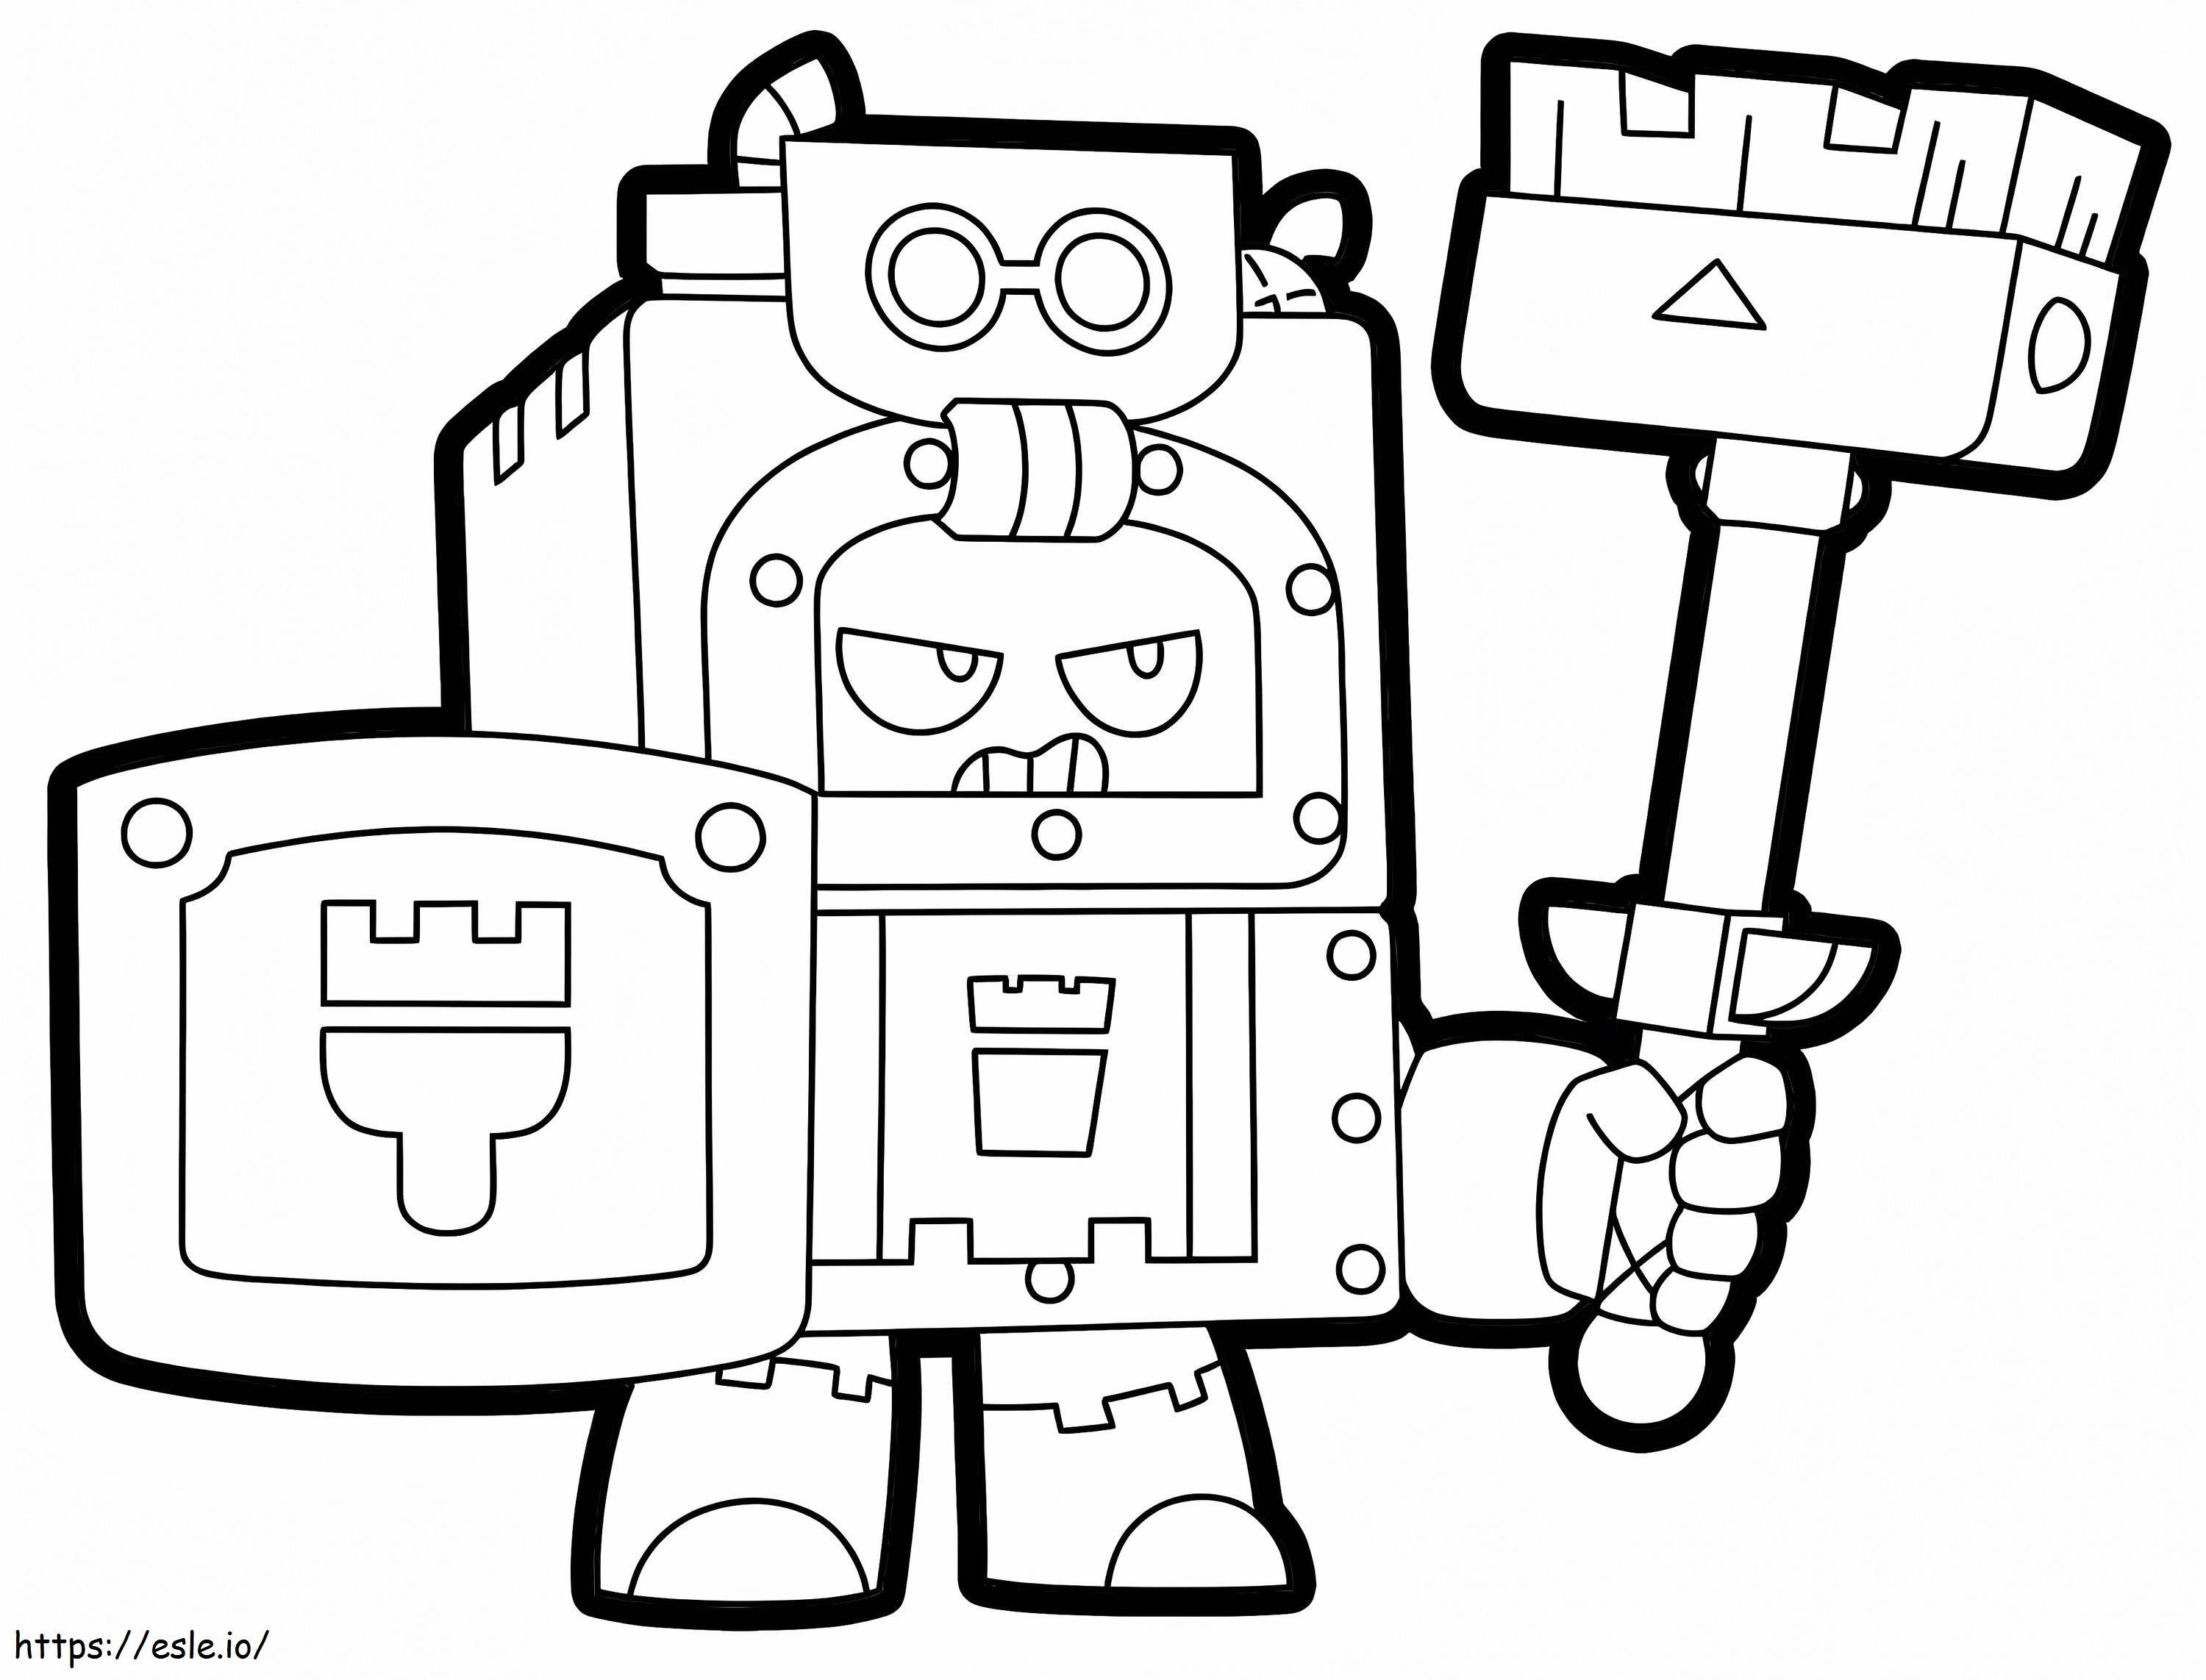 Ash From Brawl Stars coloring page